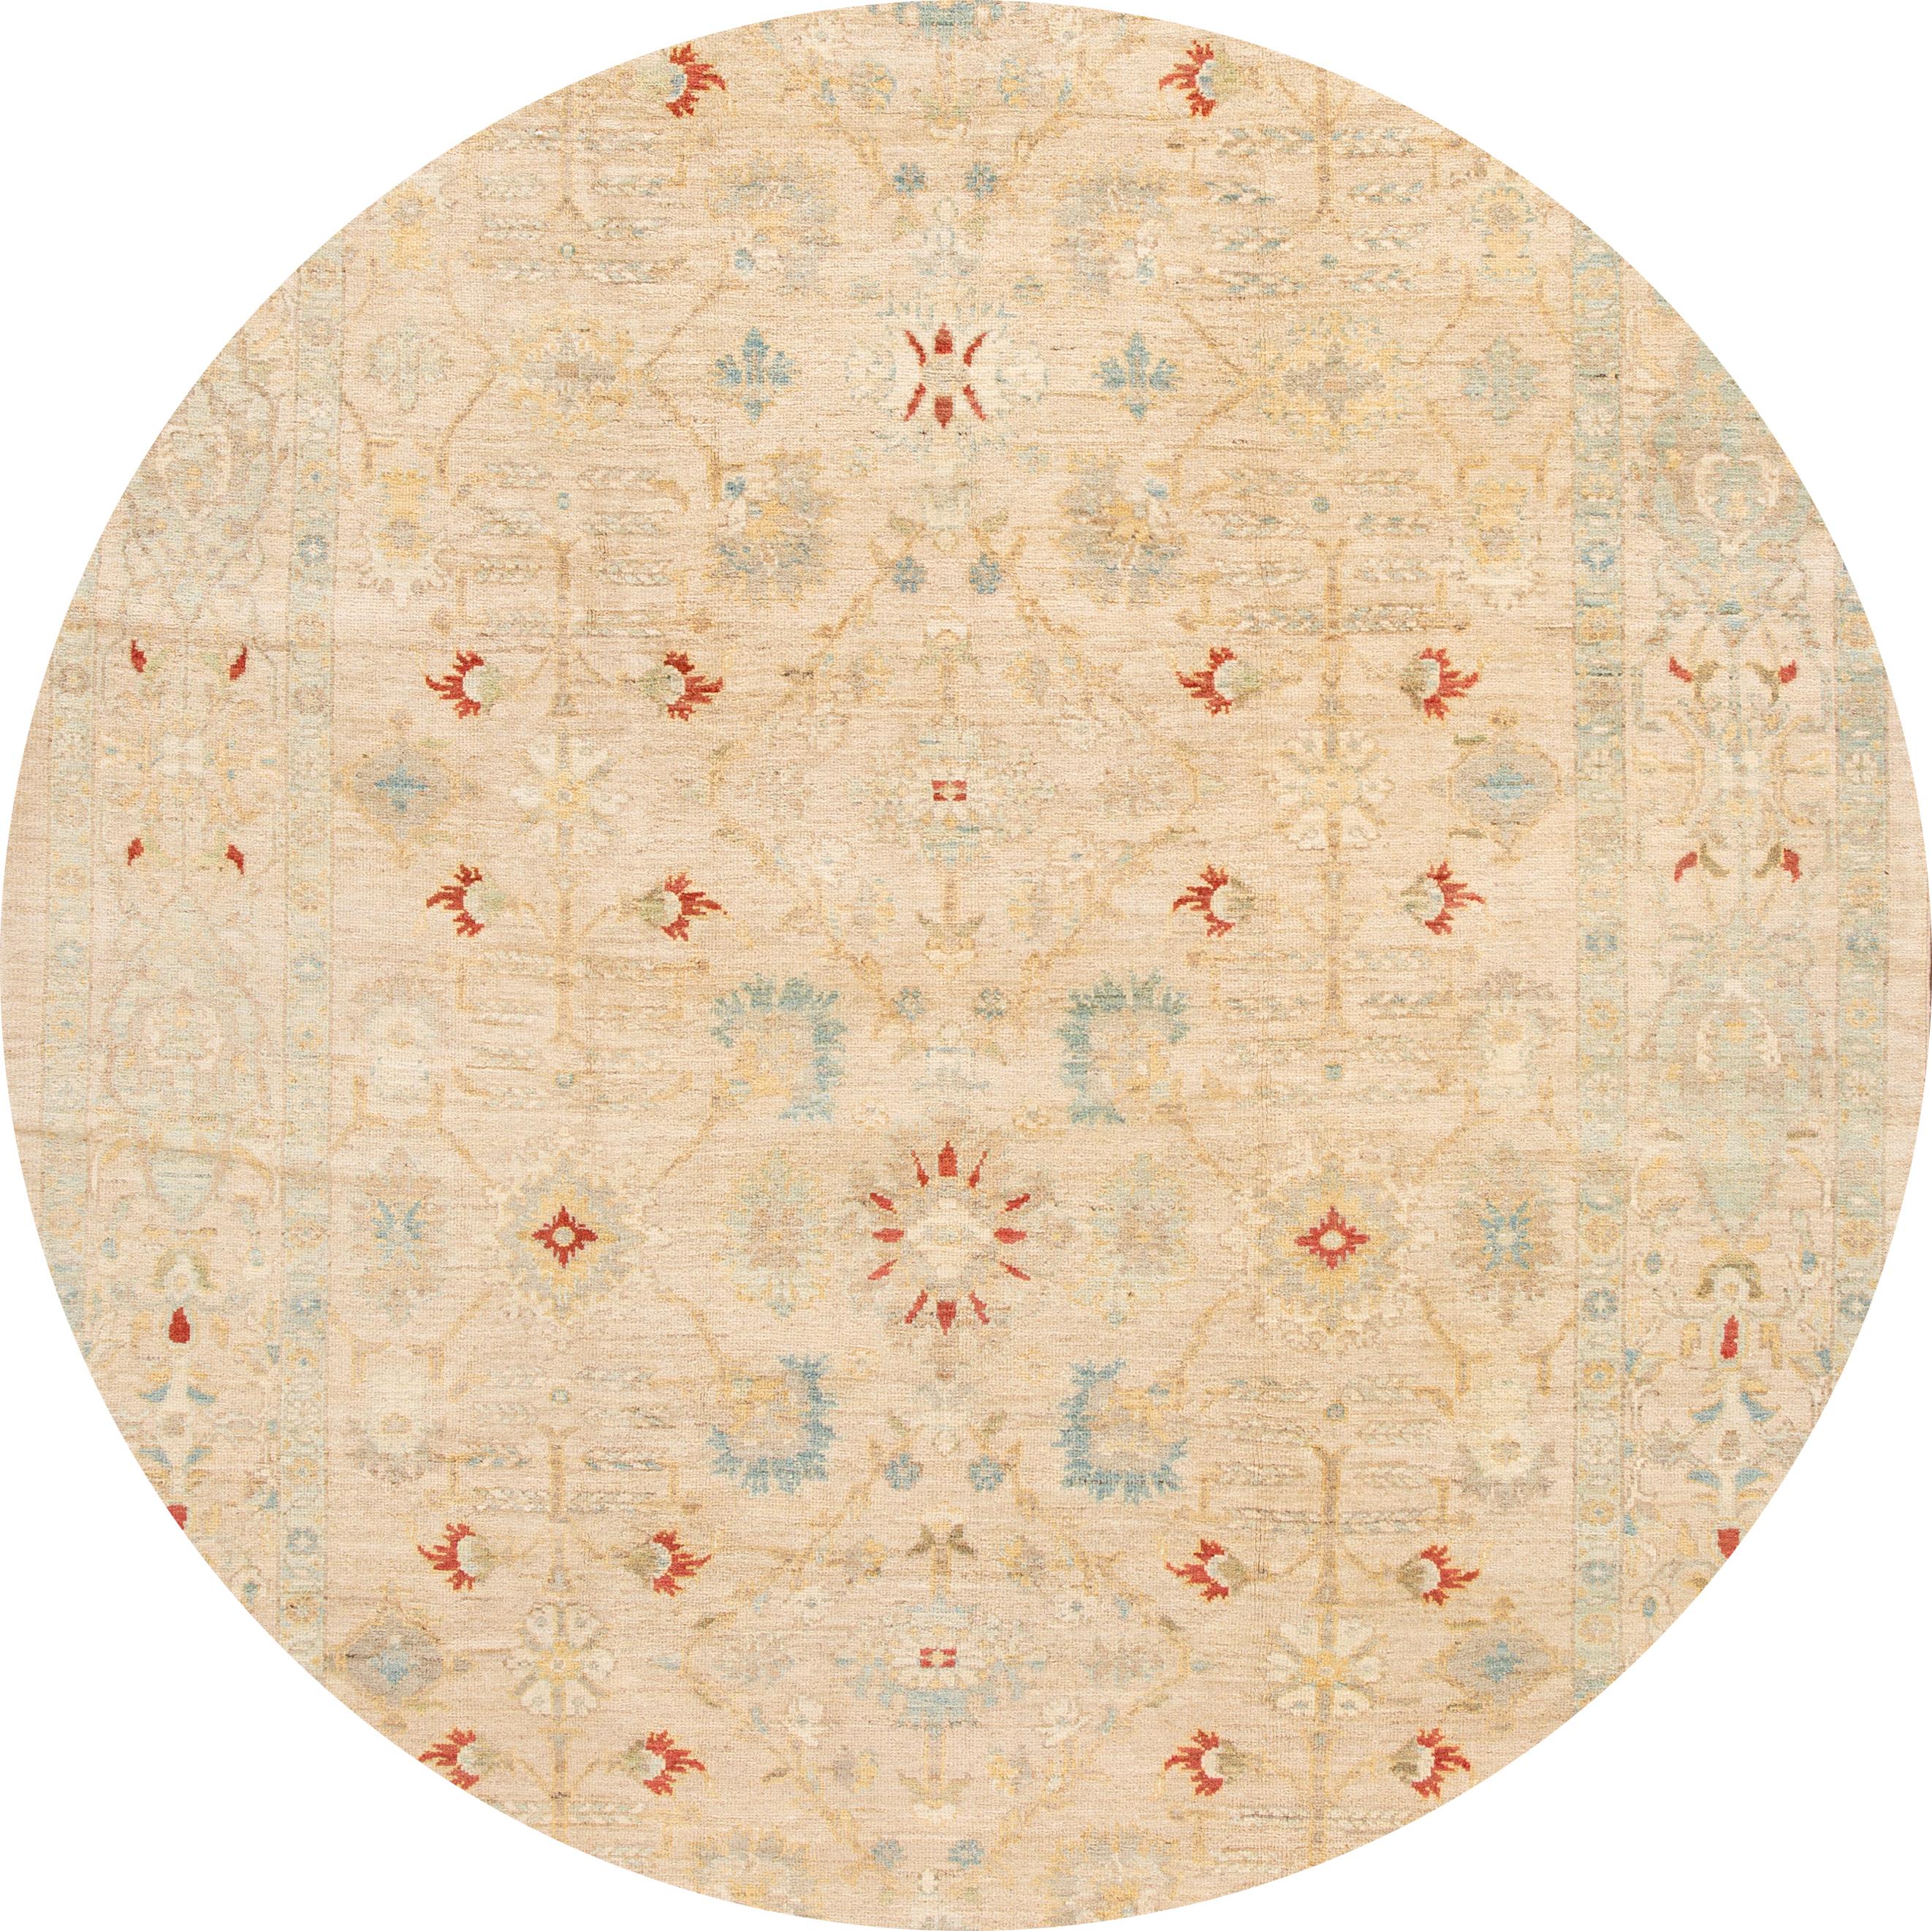 Beautiful contemporary Persian Sultanabad rug, hand-knotted wool with a tan field, blue, red and ivory accents all over the design, 
This rug measures 8' 8